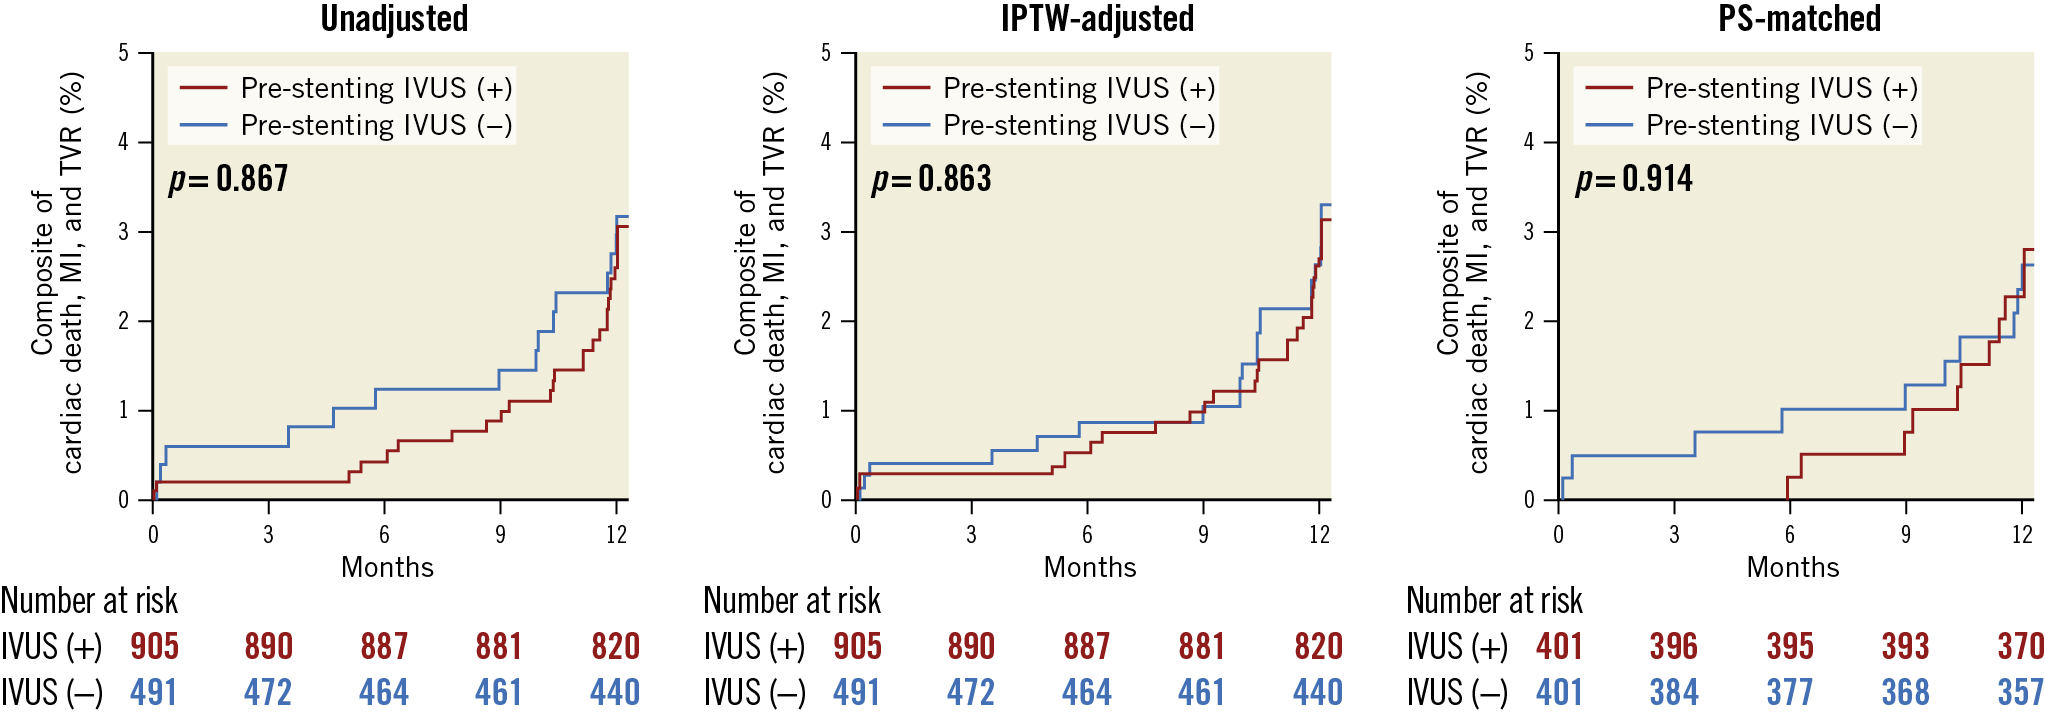 Figure 3. Kaplan-Meier survival curves for the clinical outcomes after one year. IPTW: inverse probability of treatment weighting; IVUS: intravascular ultrasound; MI: myocardial infarction; PS: propensity score; TVR: target vessel revascularisation